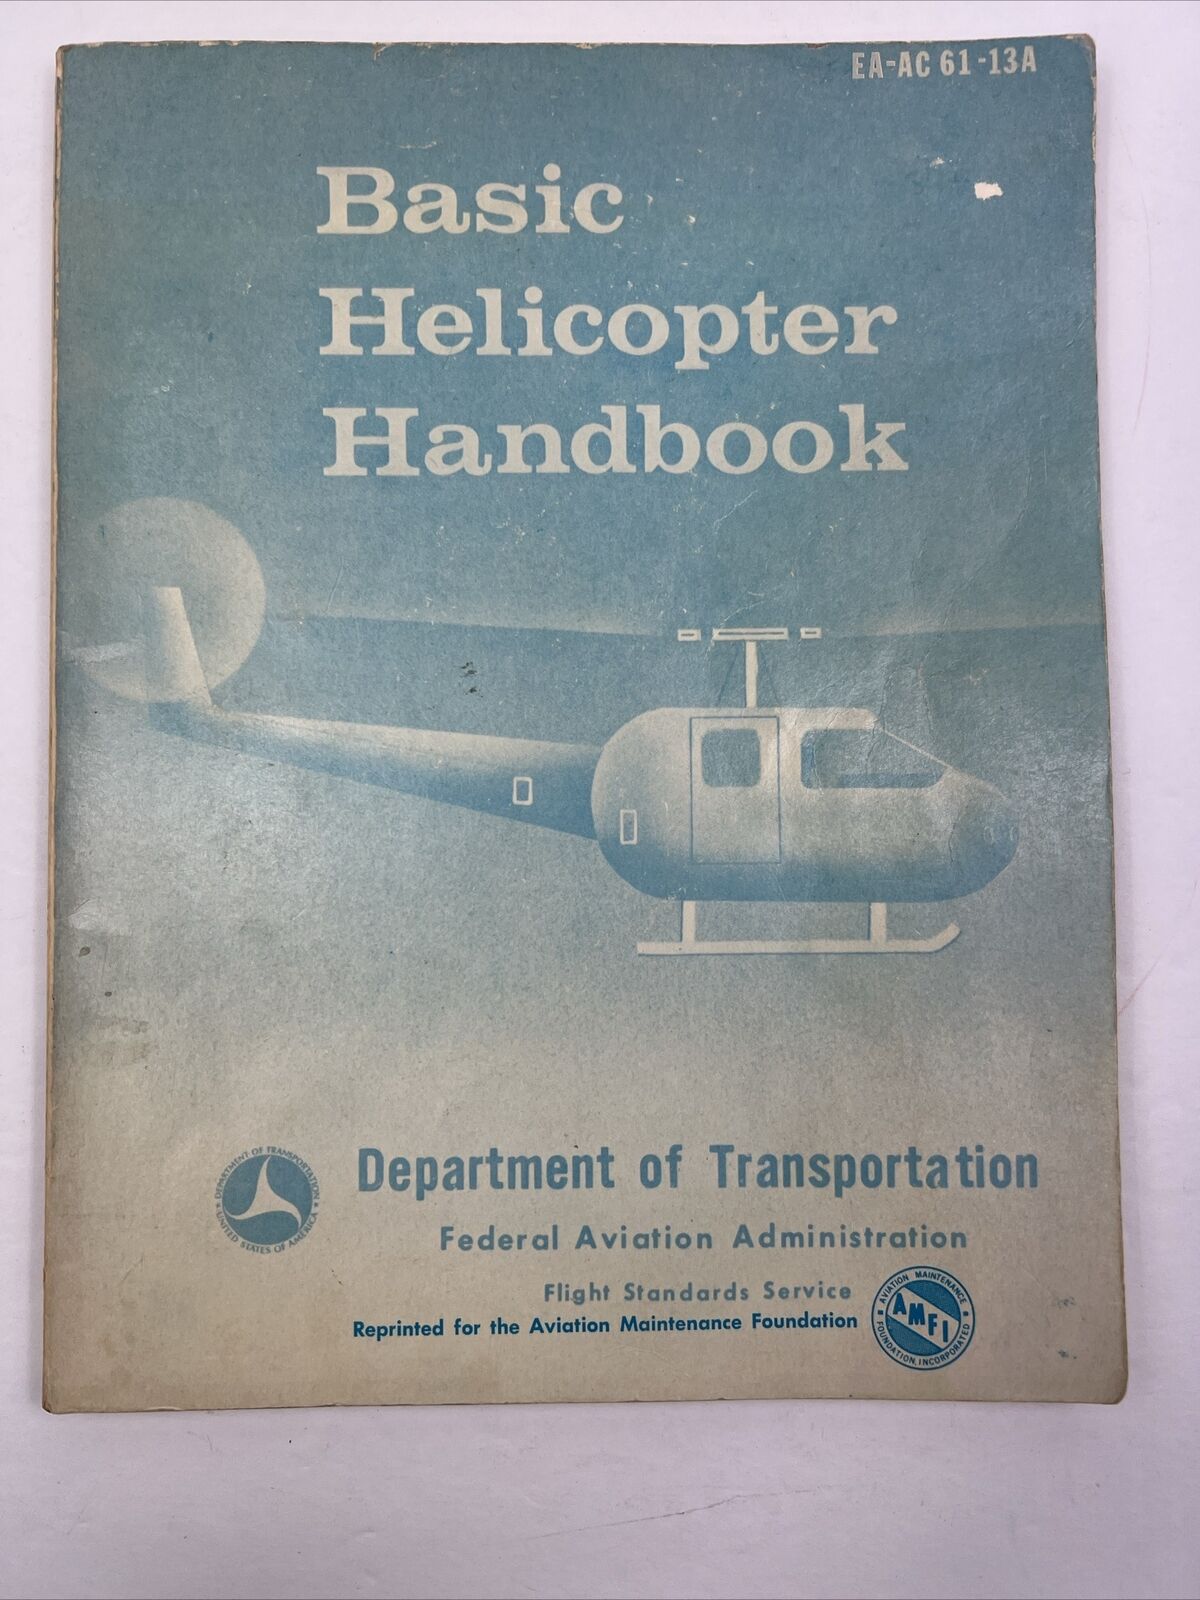 Basic Helicopter Handbook 1973 Dated DOT FAA  AC 61-13A 